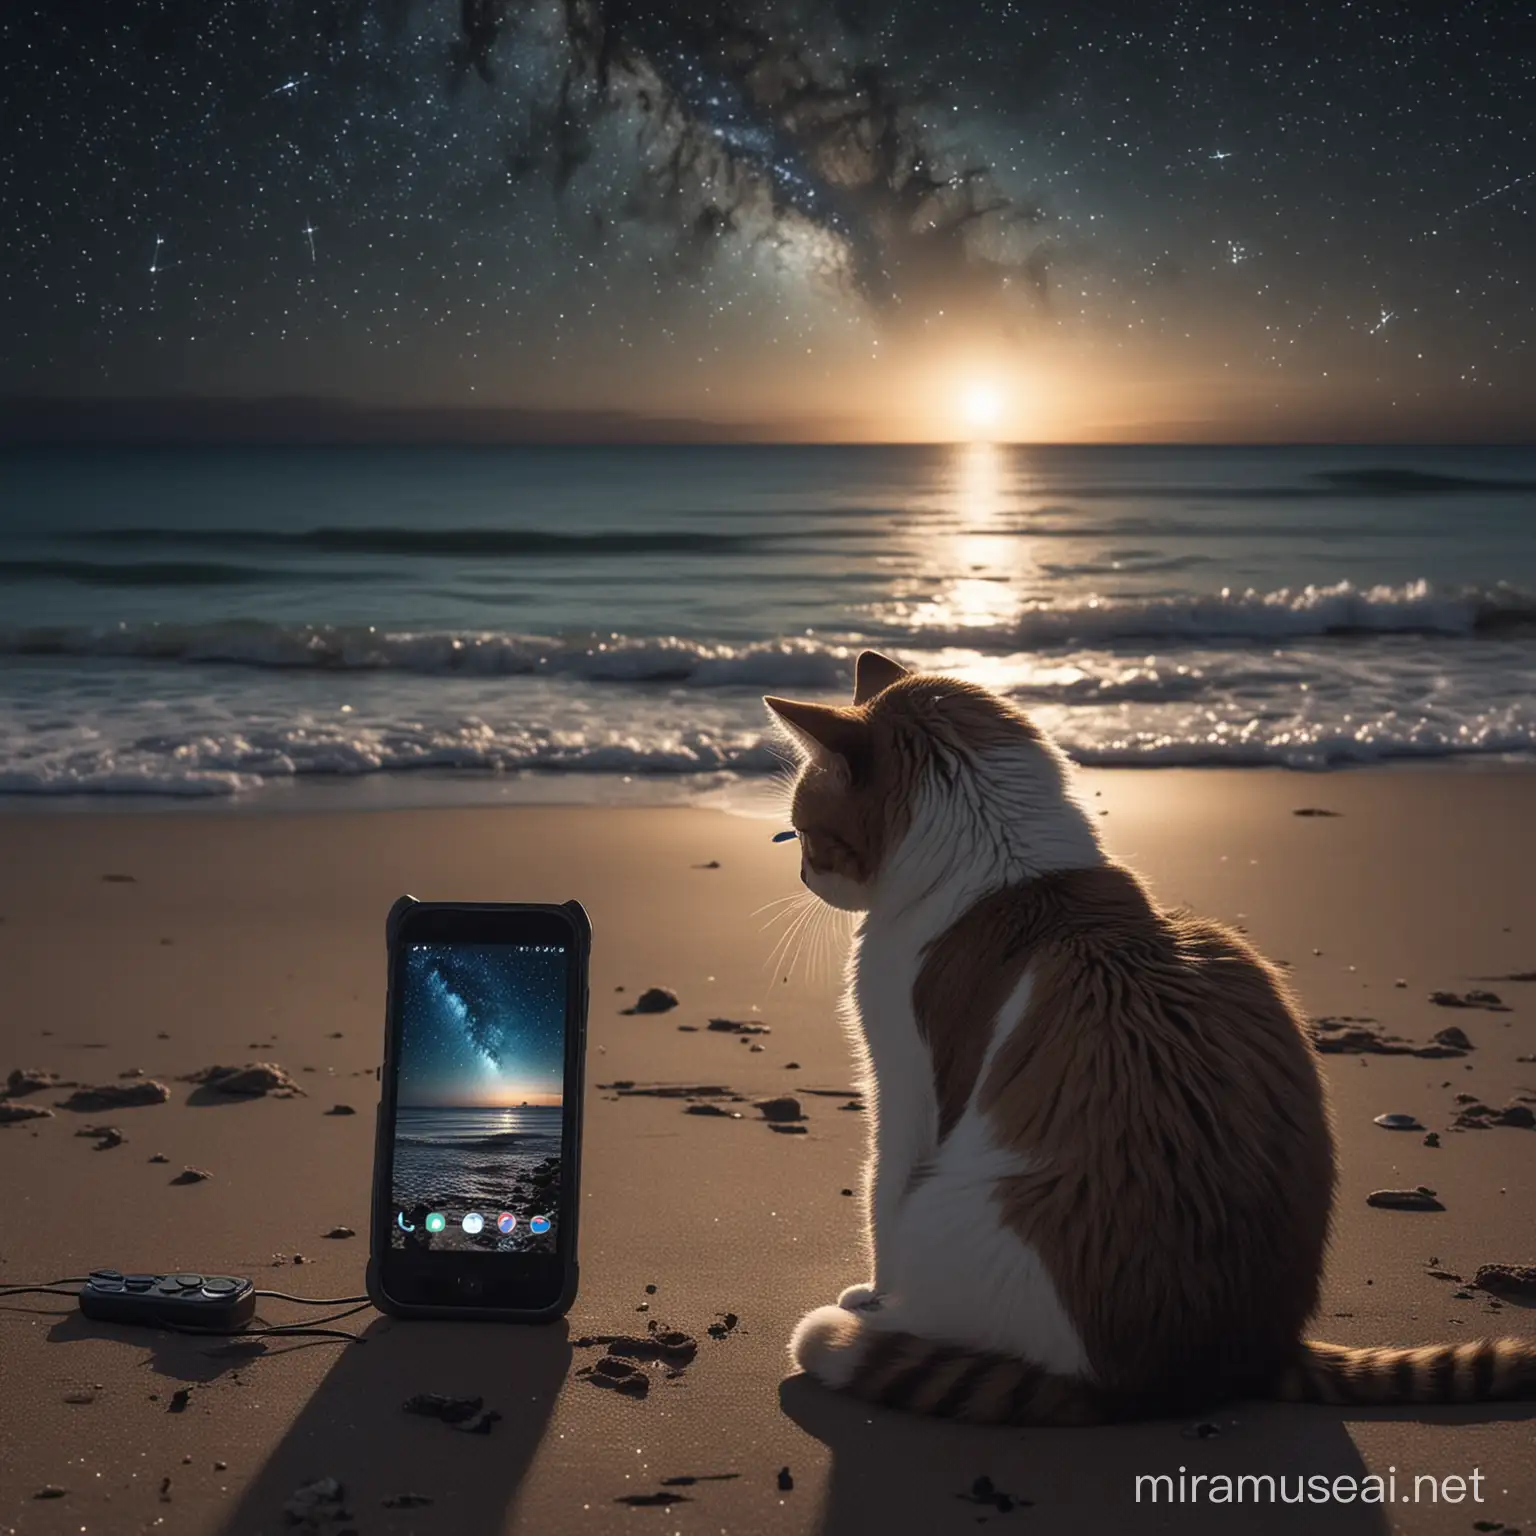 Lonely Cat Gazing at Smartphone on Midnight Beach Under Starry Sky